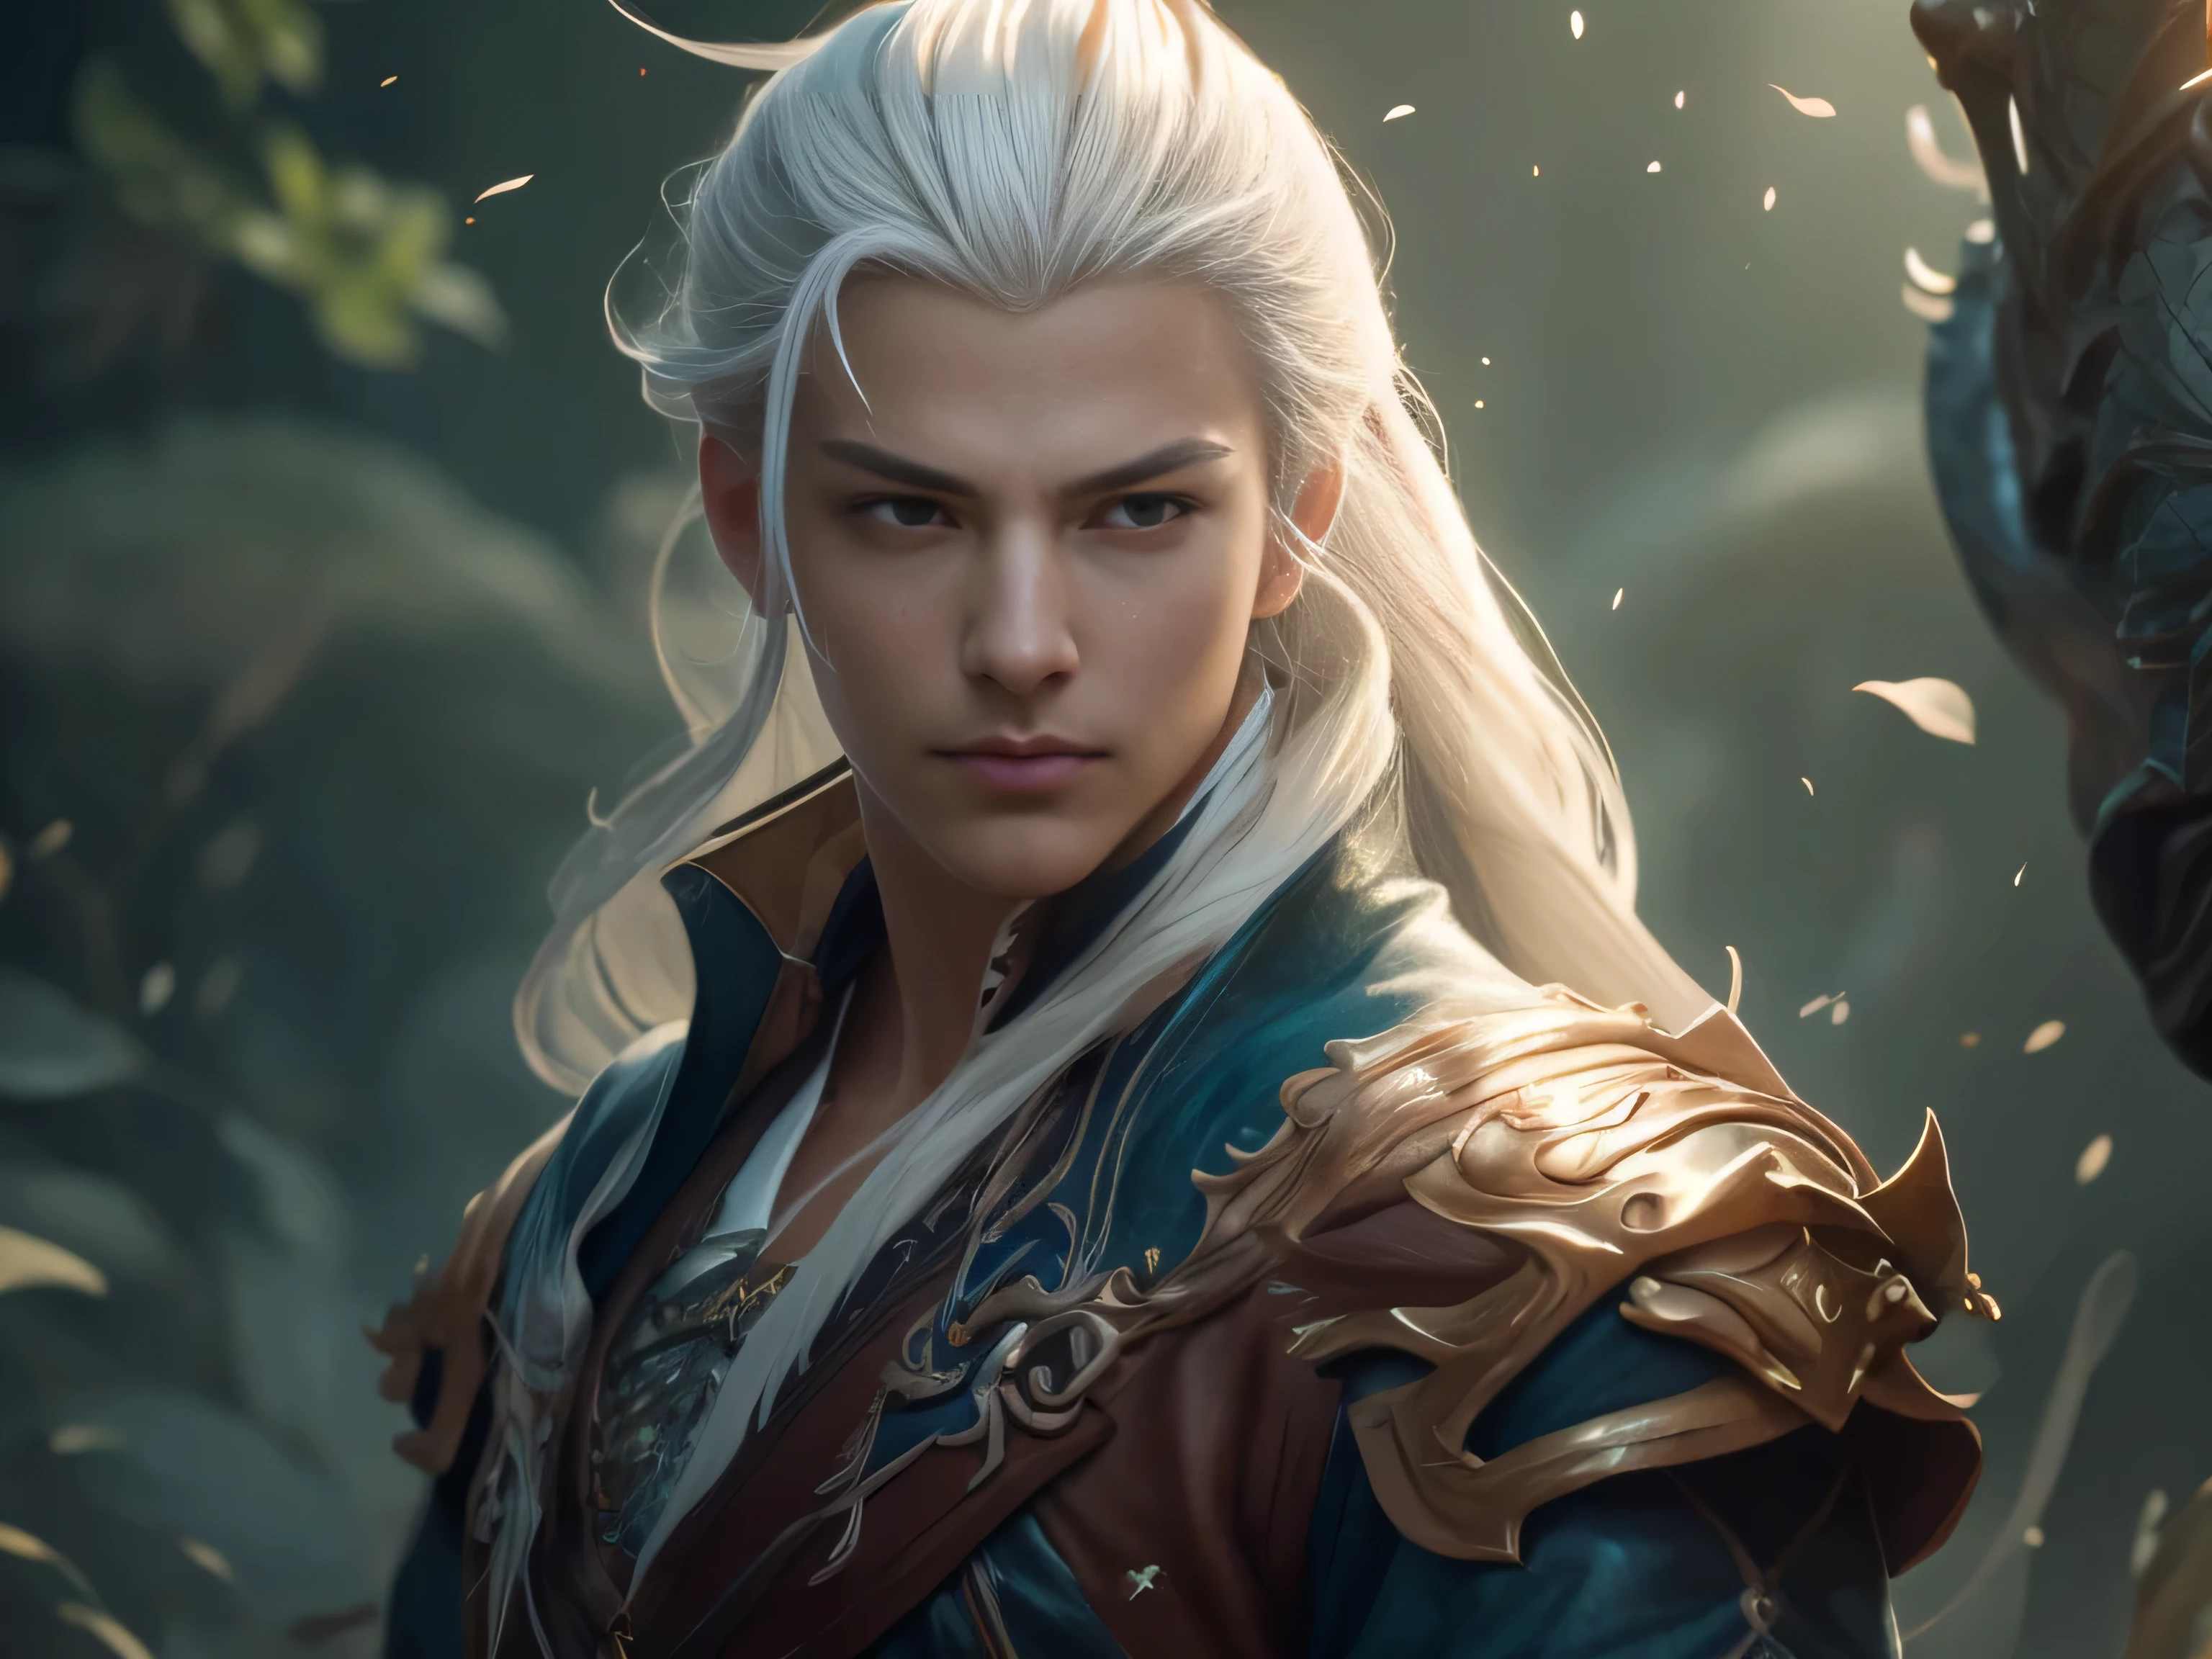 (Best Quality, 8K, Masterpiece, HDR, Soft Lighting, Picture Perfect, Realistic, Vivid), Male Humanoid Dragon (1.0), 1 Guy, Perfect Face, Super Detailed Photo of a Gorgeous Humanoid Dragon Man with Long White Hair, Side by Side lies a white dragon, Beautiful anime fantasy, background blur, anime fantasy, work in the style of Gouves, realism: 1.37, long white hair, plump lips, (Ultra high quality fantasy art), Masterpiece, male model, male character ultra high quality designs, detailed 8k anime art, realistic anime art, highest quality wallpapers, intricate ultra high quality accurate male characters faces, high quality designs and accurate physics (fantasy - ultra high quality art), dark fantasy style), masterpieces, super high quality quality characters, anime resolution - 8K, realistic anime art, wallpapers with the highest quality illustrations, ultra-high detail faces, high-quality design and accurate physics), color, depth of field, shadows, ray tracing, high-quality execution. -high quality and 8K resolution, (Accurate simulation of the interaction of light and materials)], [High-quality hair detail [Read more about beautiful and shiny white hair]], (Beautifully detailed hands [perfect fingers [Perfect nails]]], (perfect anatomy ( perfect proportions)))) [[Full-length]], [Perfect combination of colors (Accurate imitation of the interaction of light and material)], [art that conveys the meaning of the story](modified)